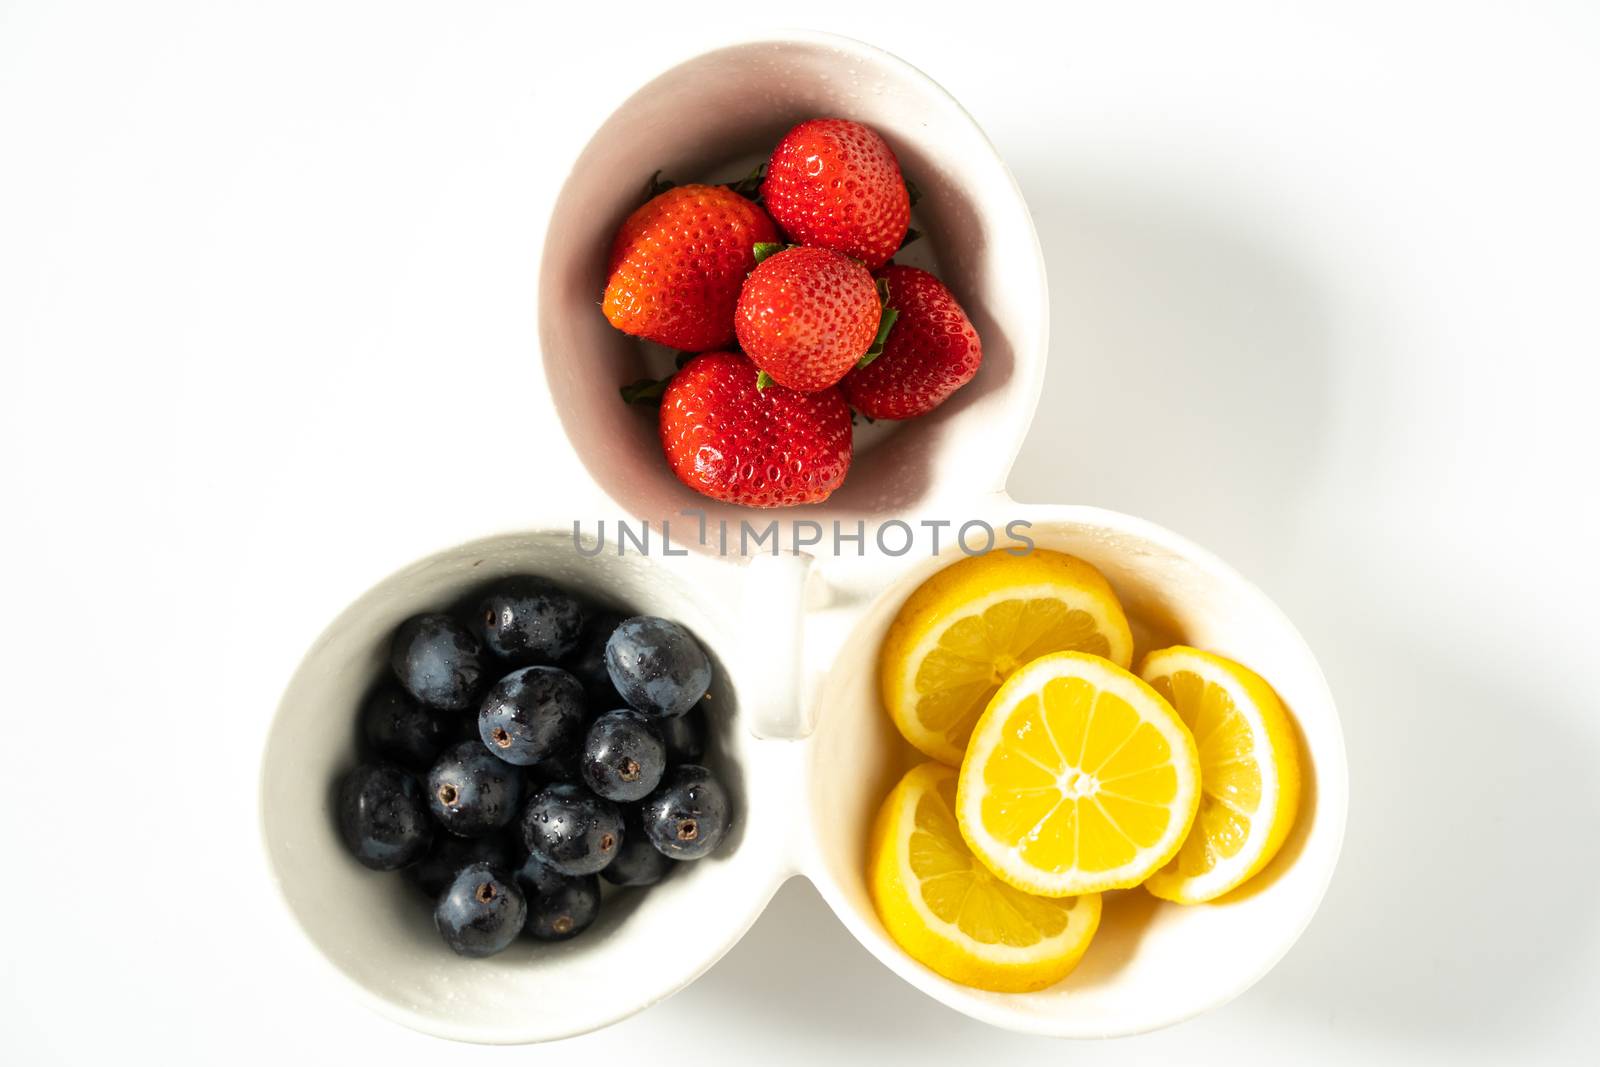 A serving dish filled with strawberries, lemon slices and black grapes against a plain white background